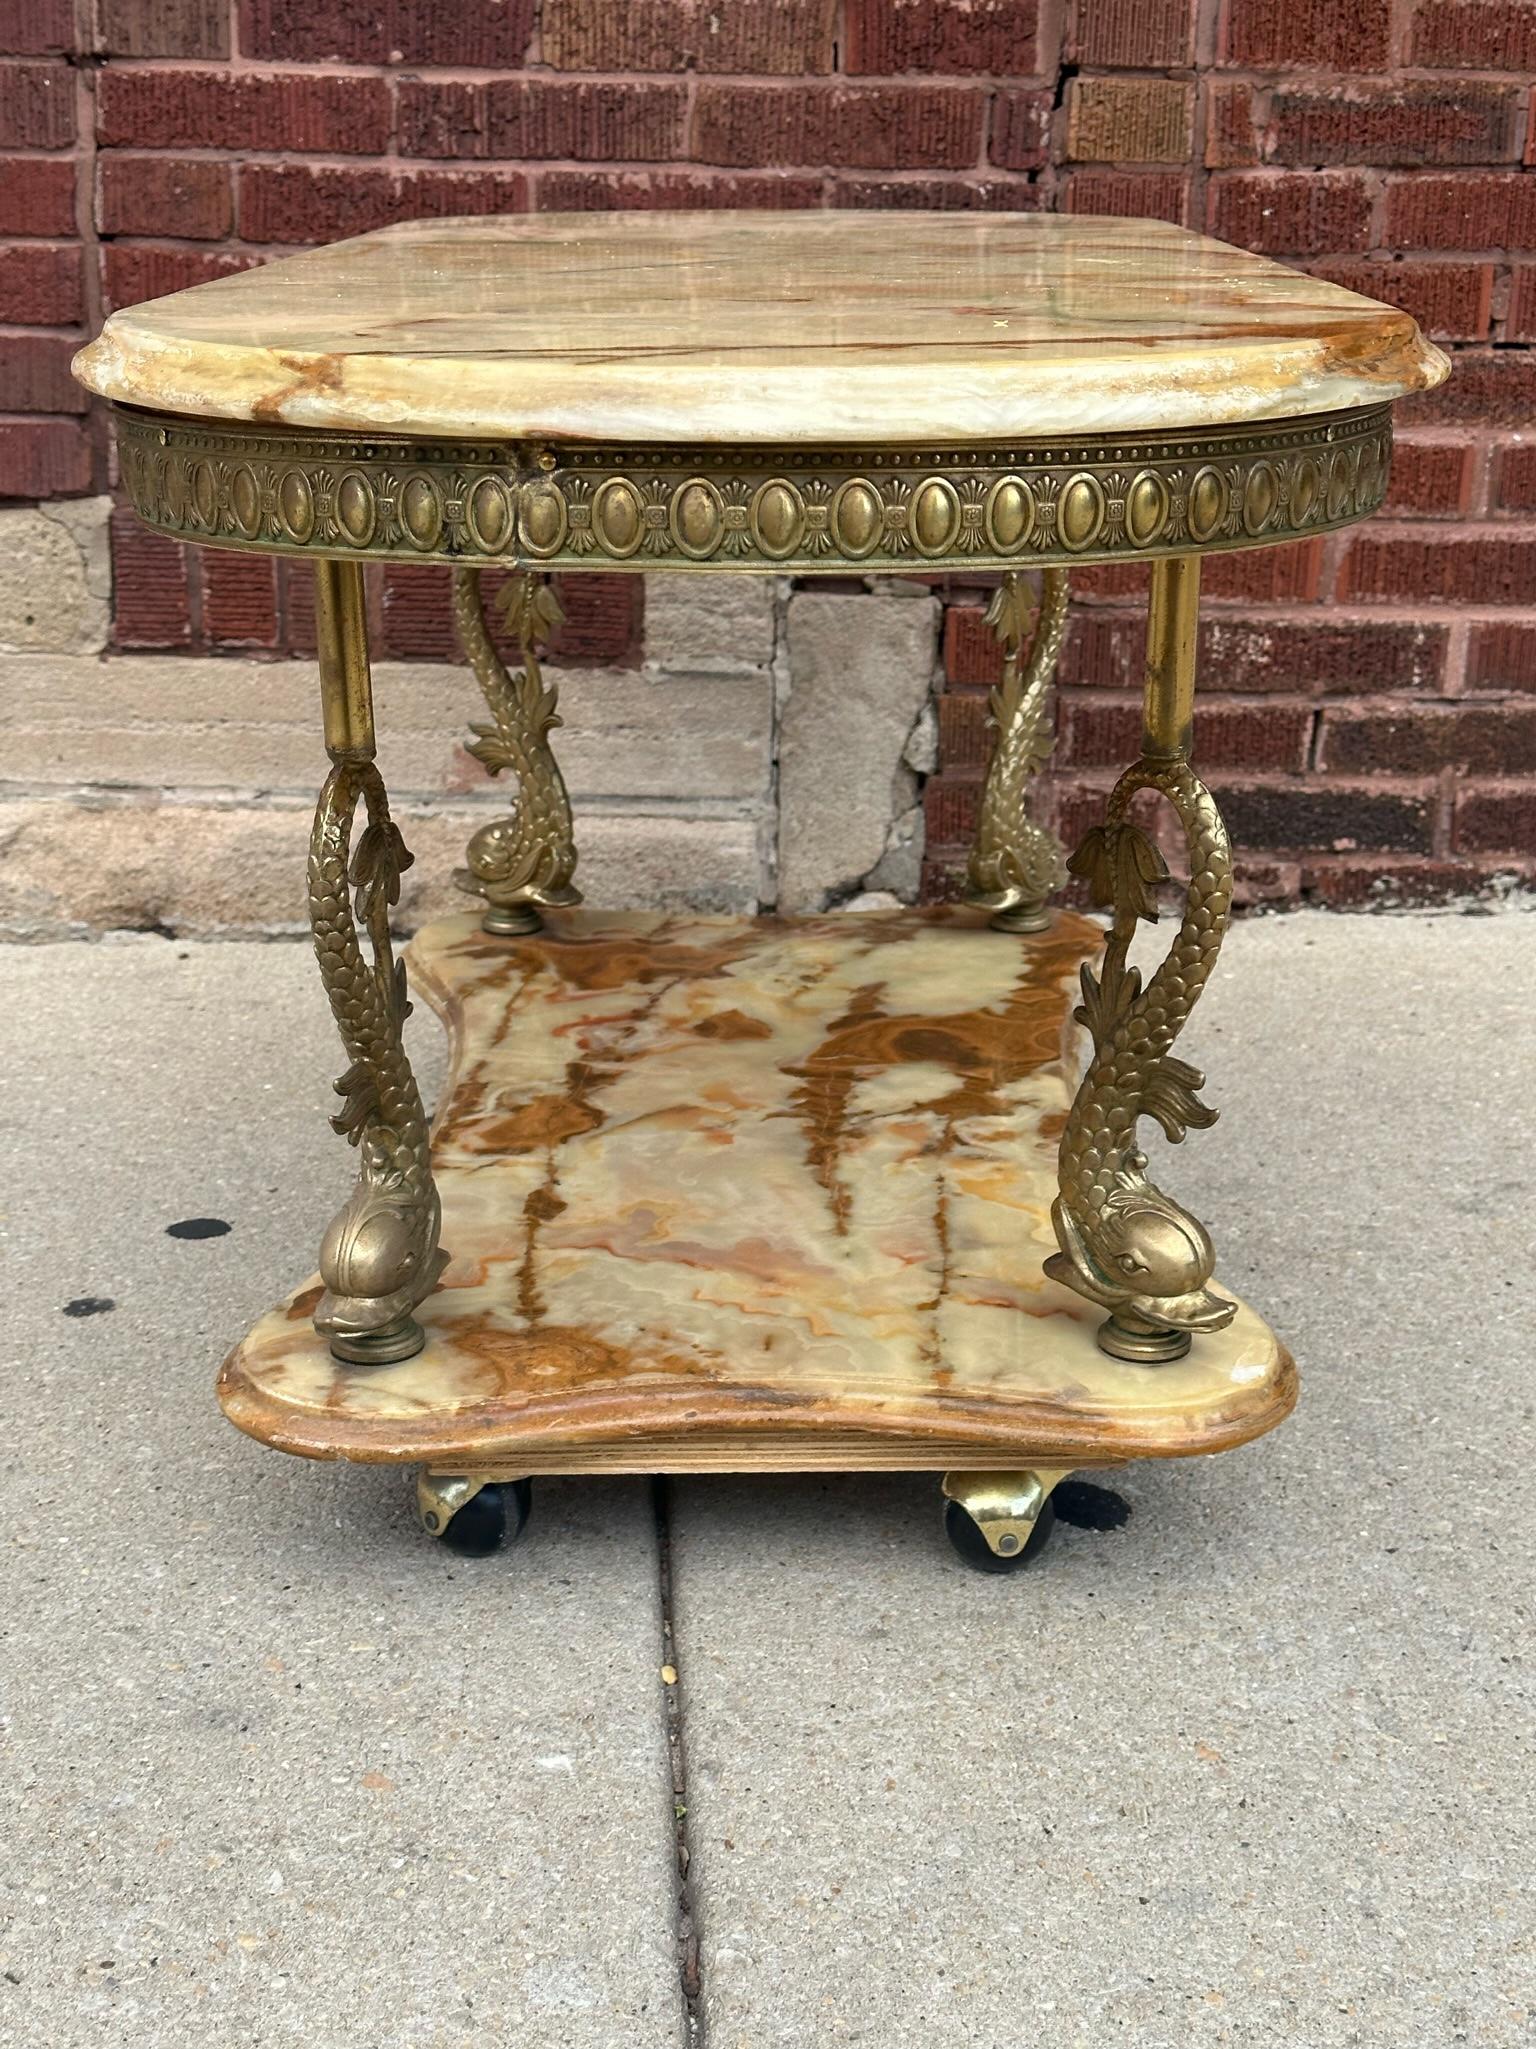 Art Nouveau Antique Italian 2 Tier Onyx and Figural Koi Fish Sculpted Brass Coffee Table